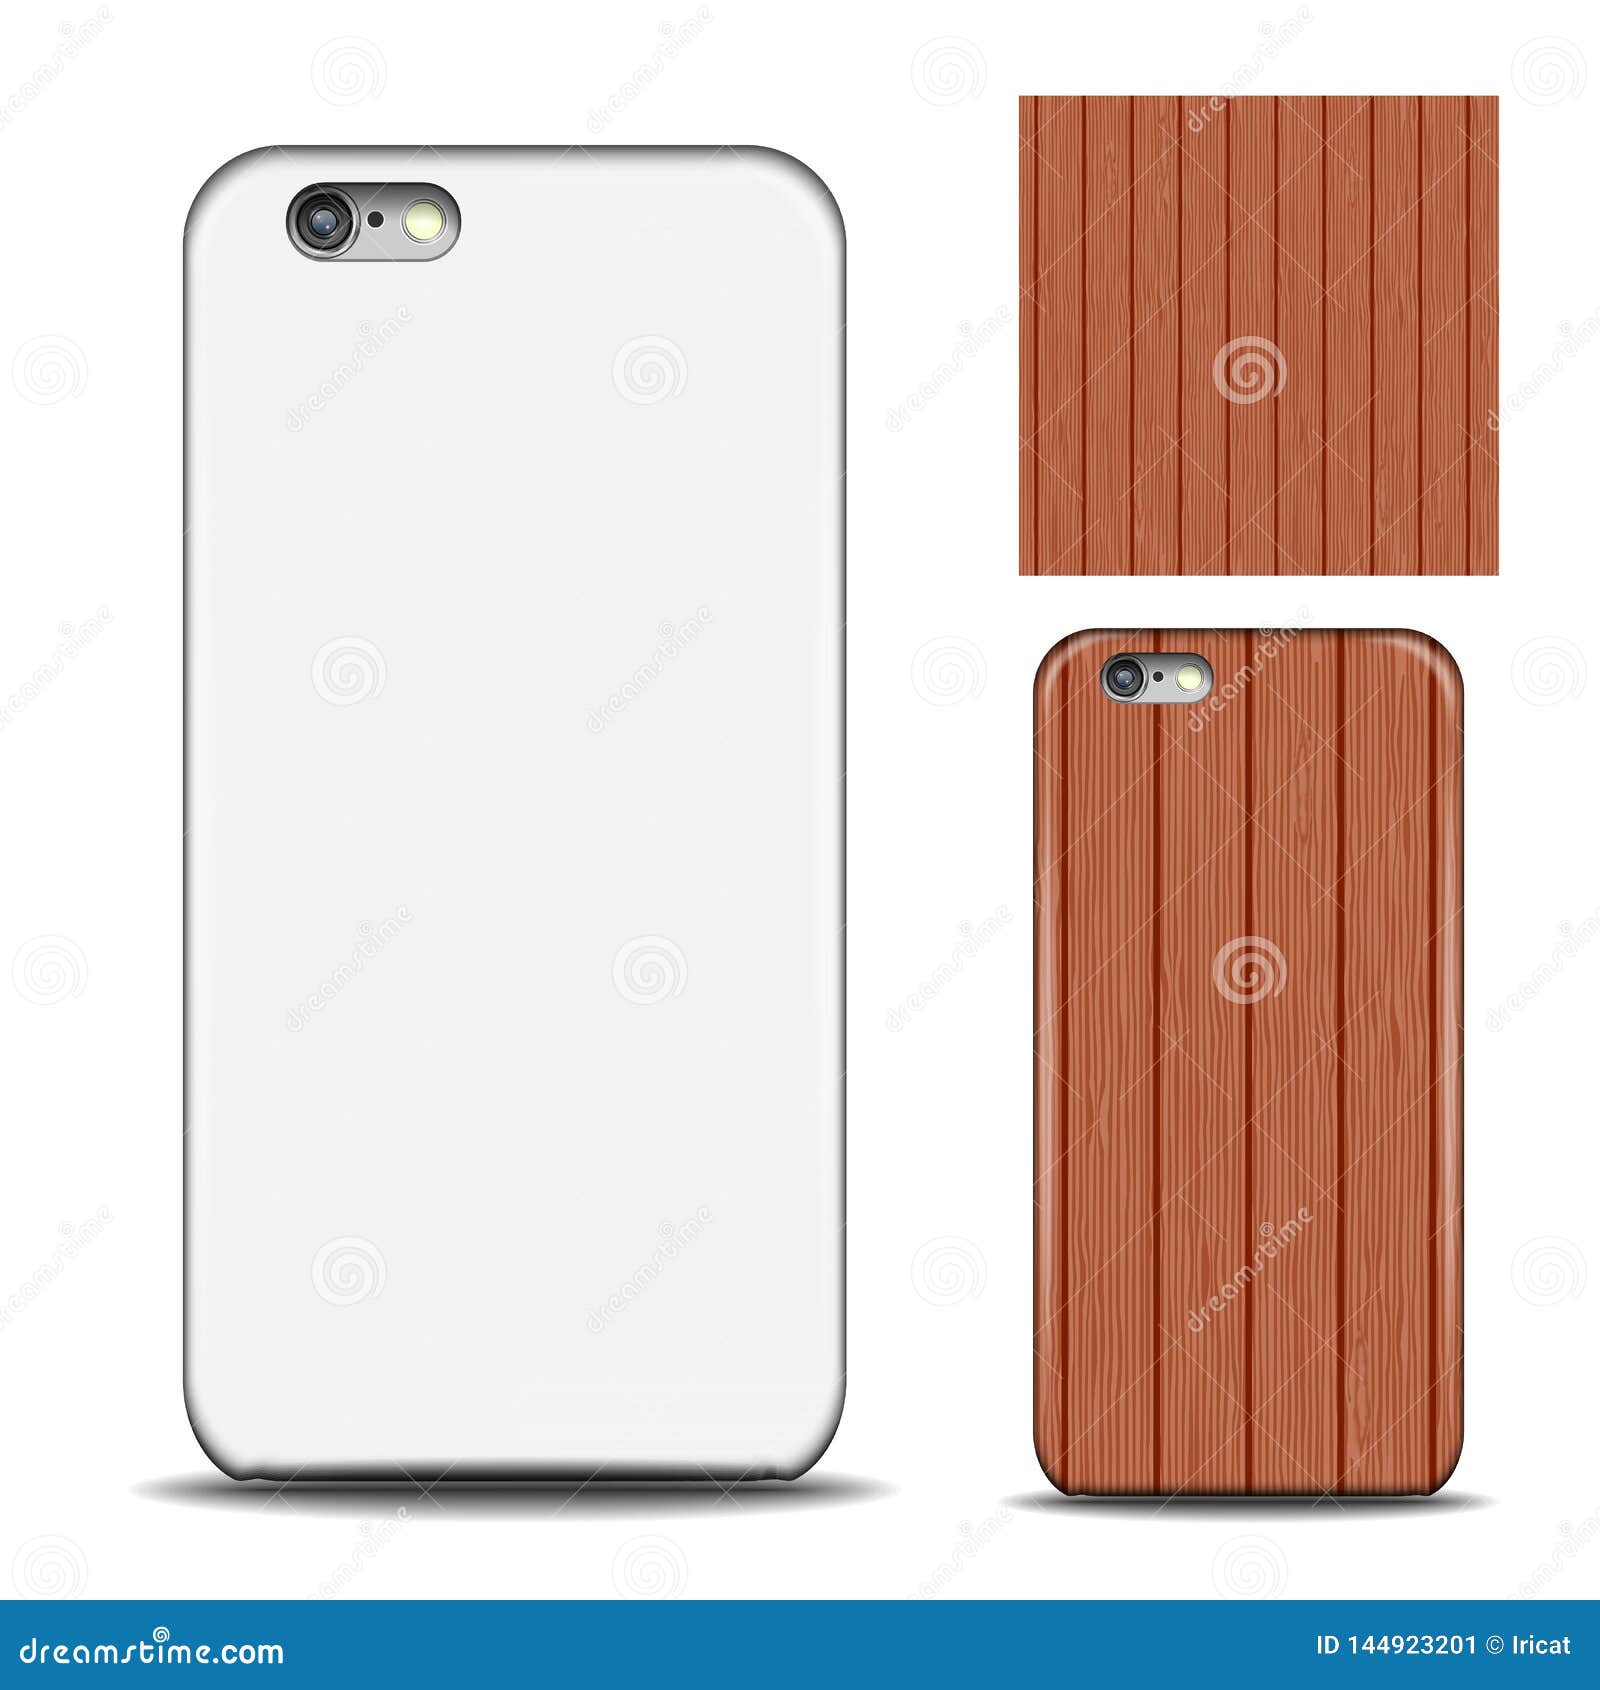 Phone Cover. Reverse Side Of Smartphone. Wood Texture ...